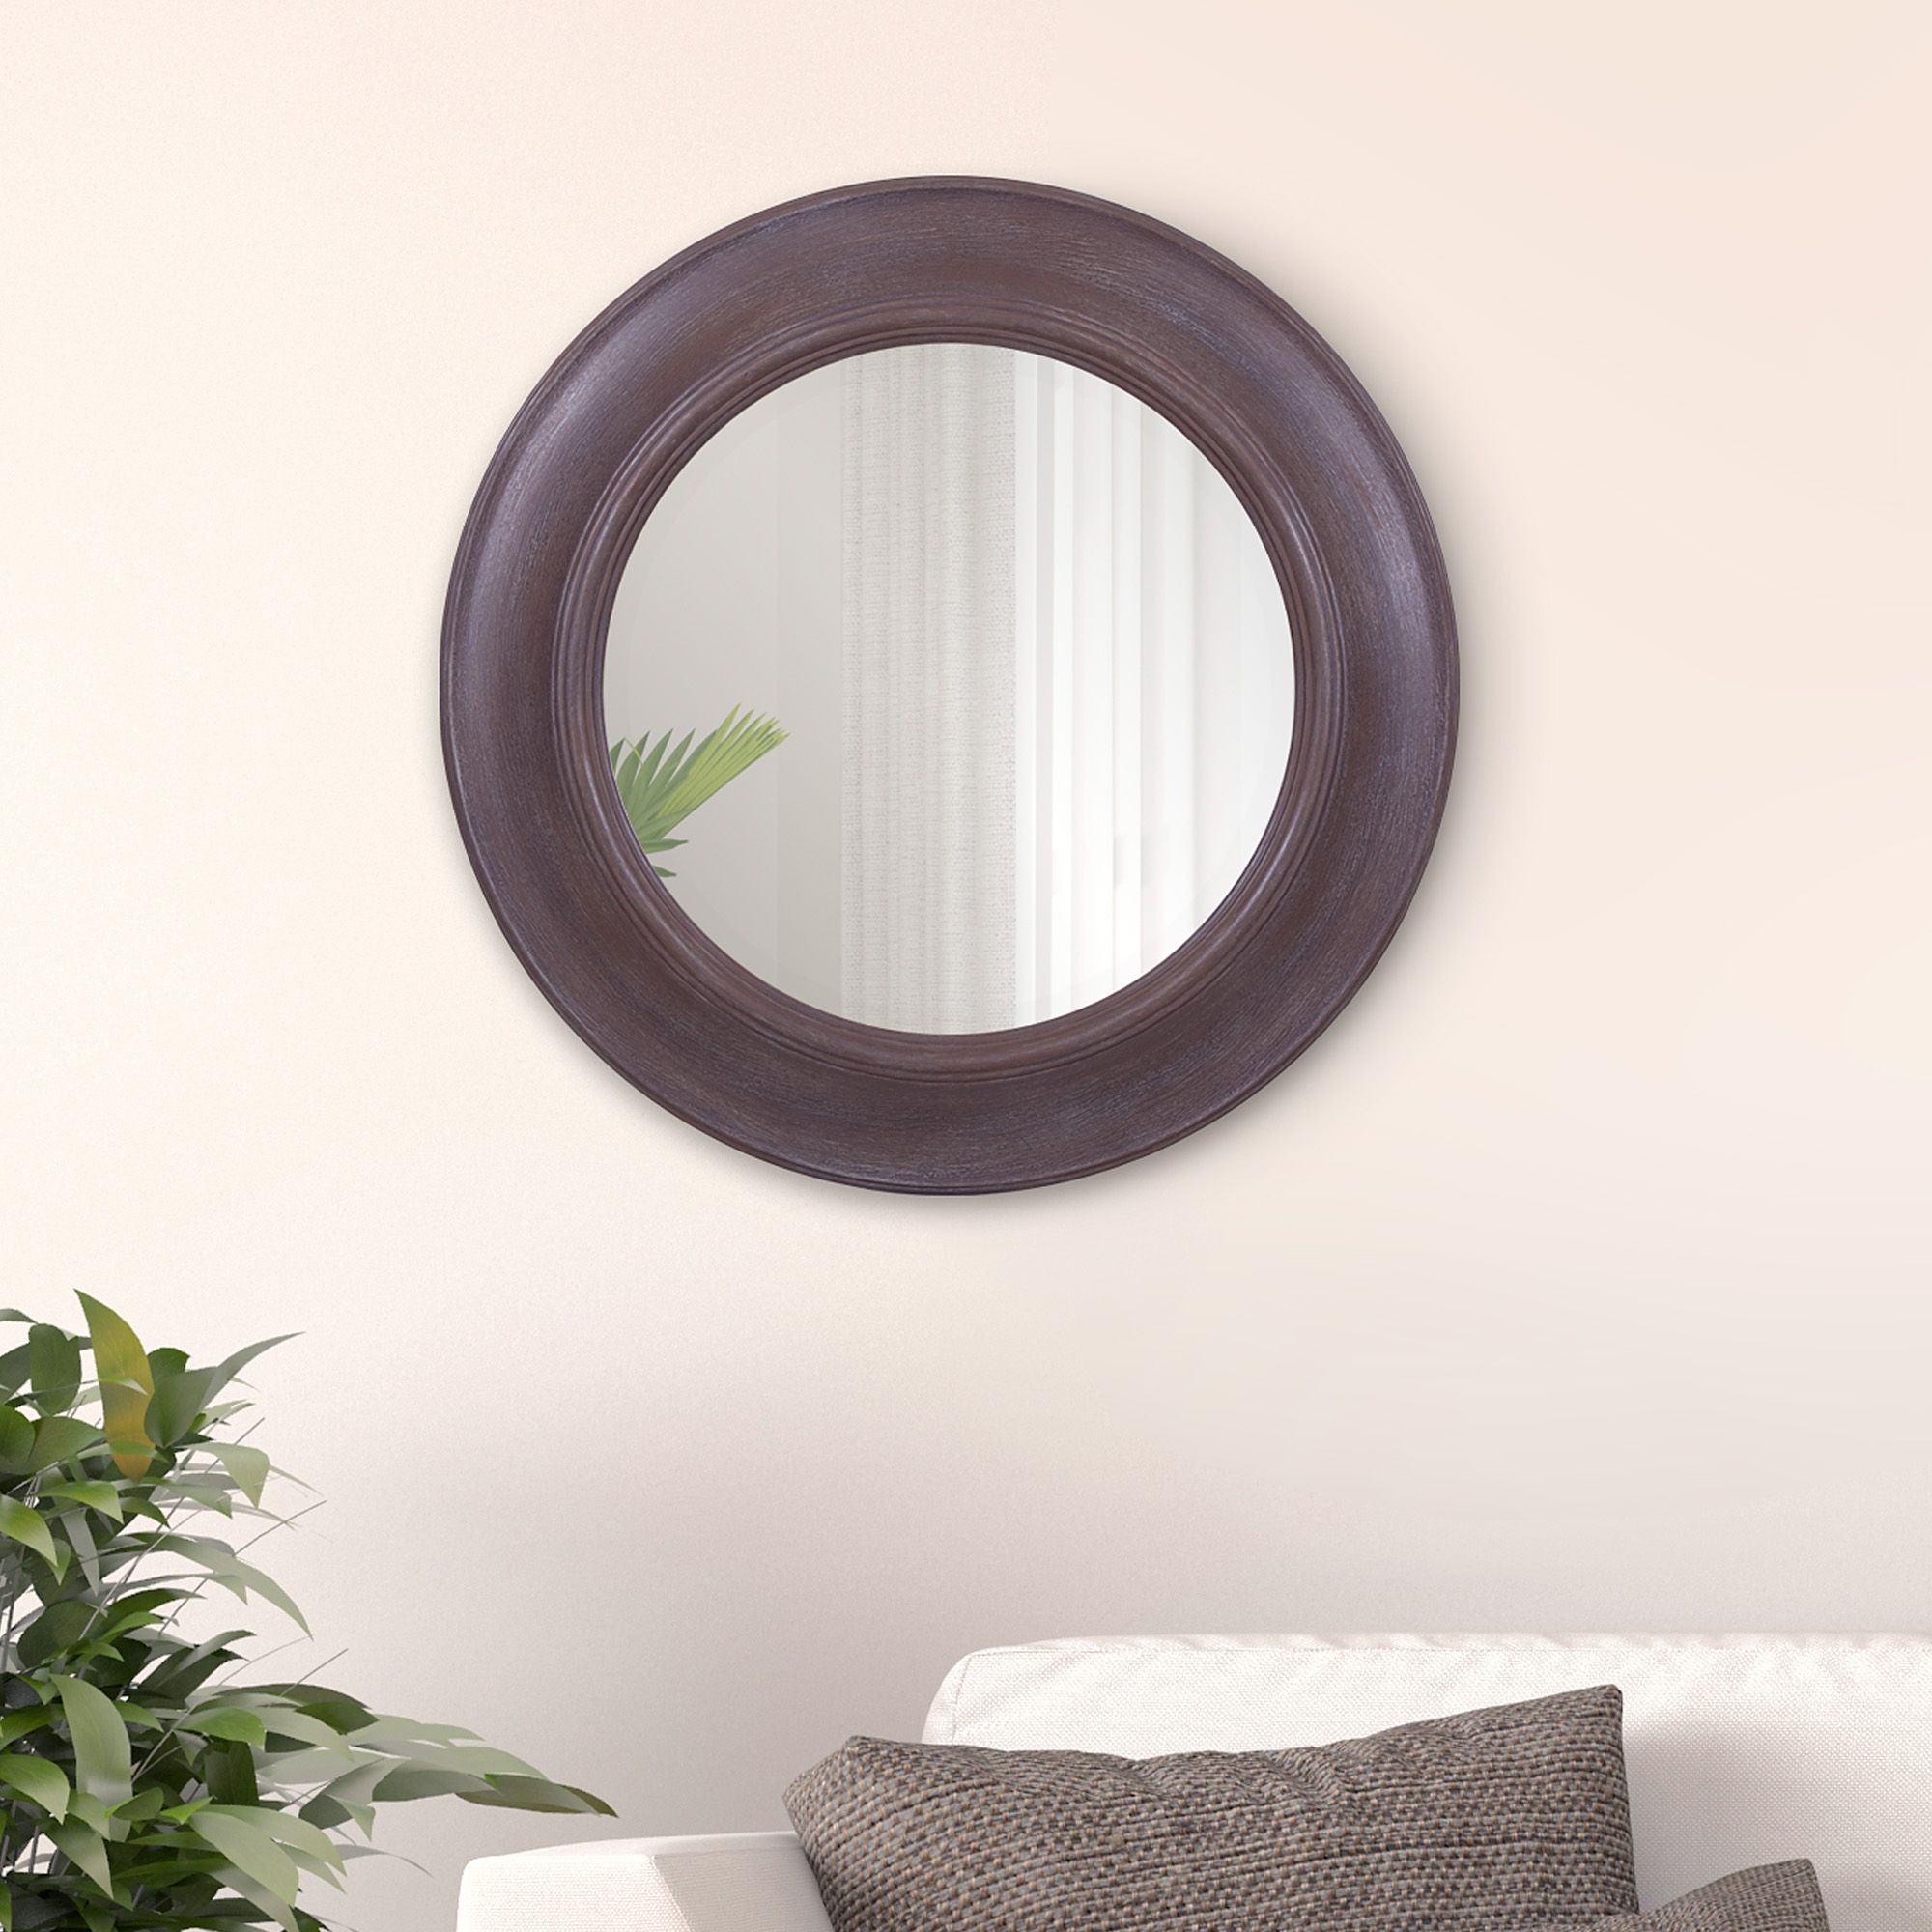 Widely Used Rustic Round Mirror In Distressed Taupe 24"x24"patton Wall Decor Pertaining To Distressed Black Round Wall Mirrors (View 2 of 15)